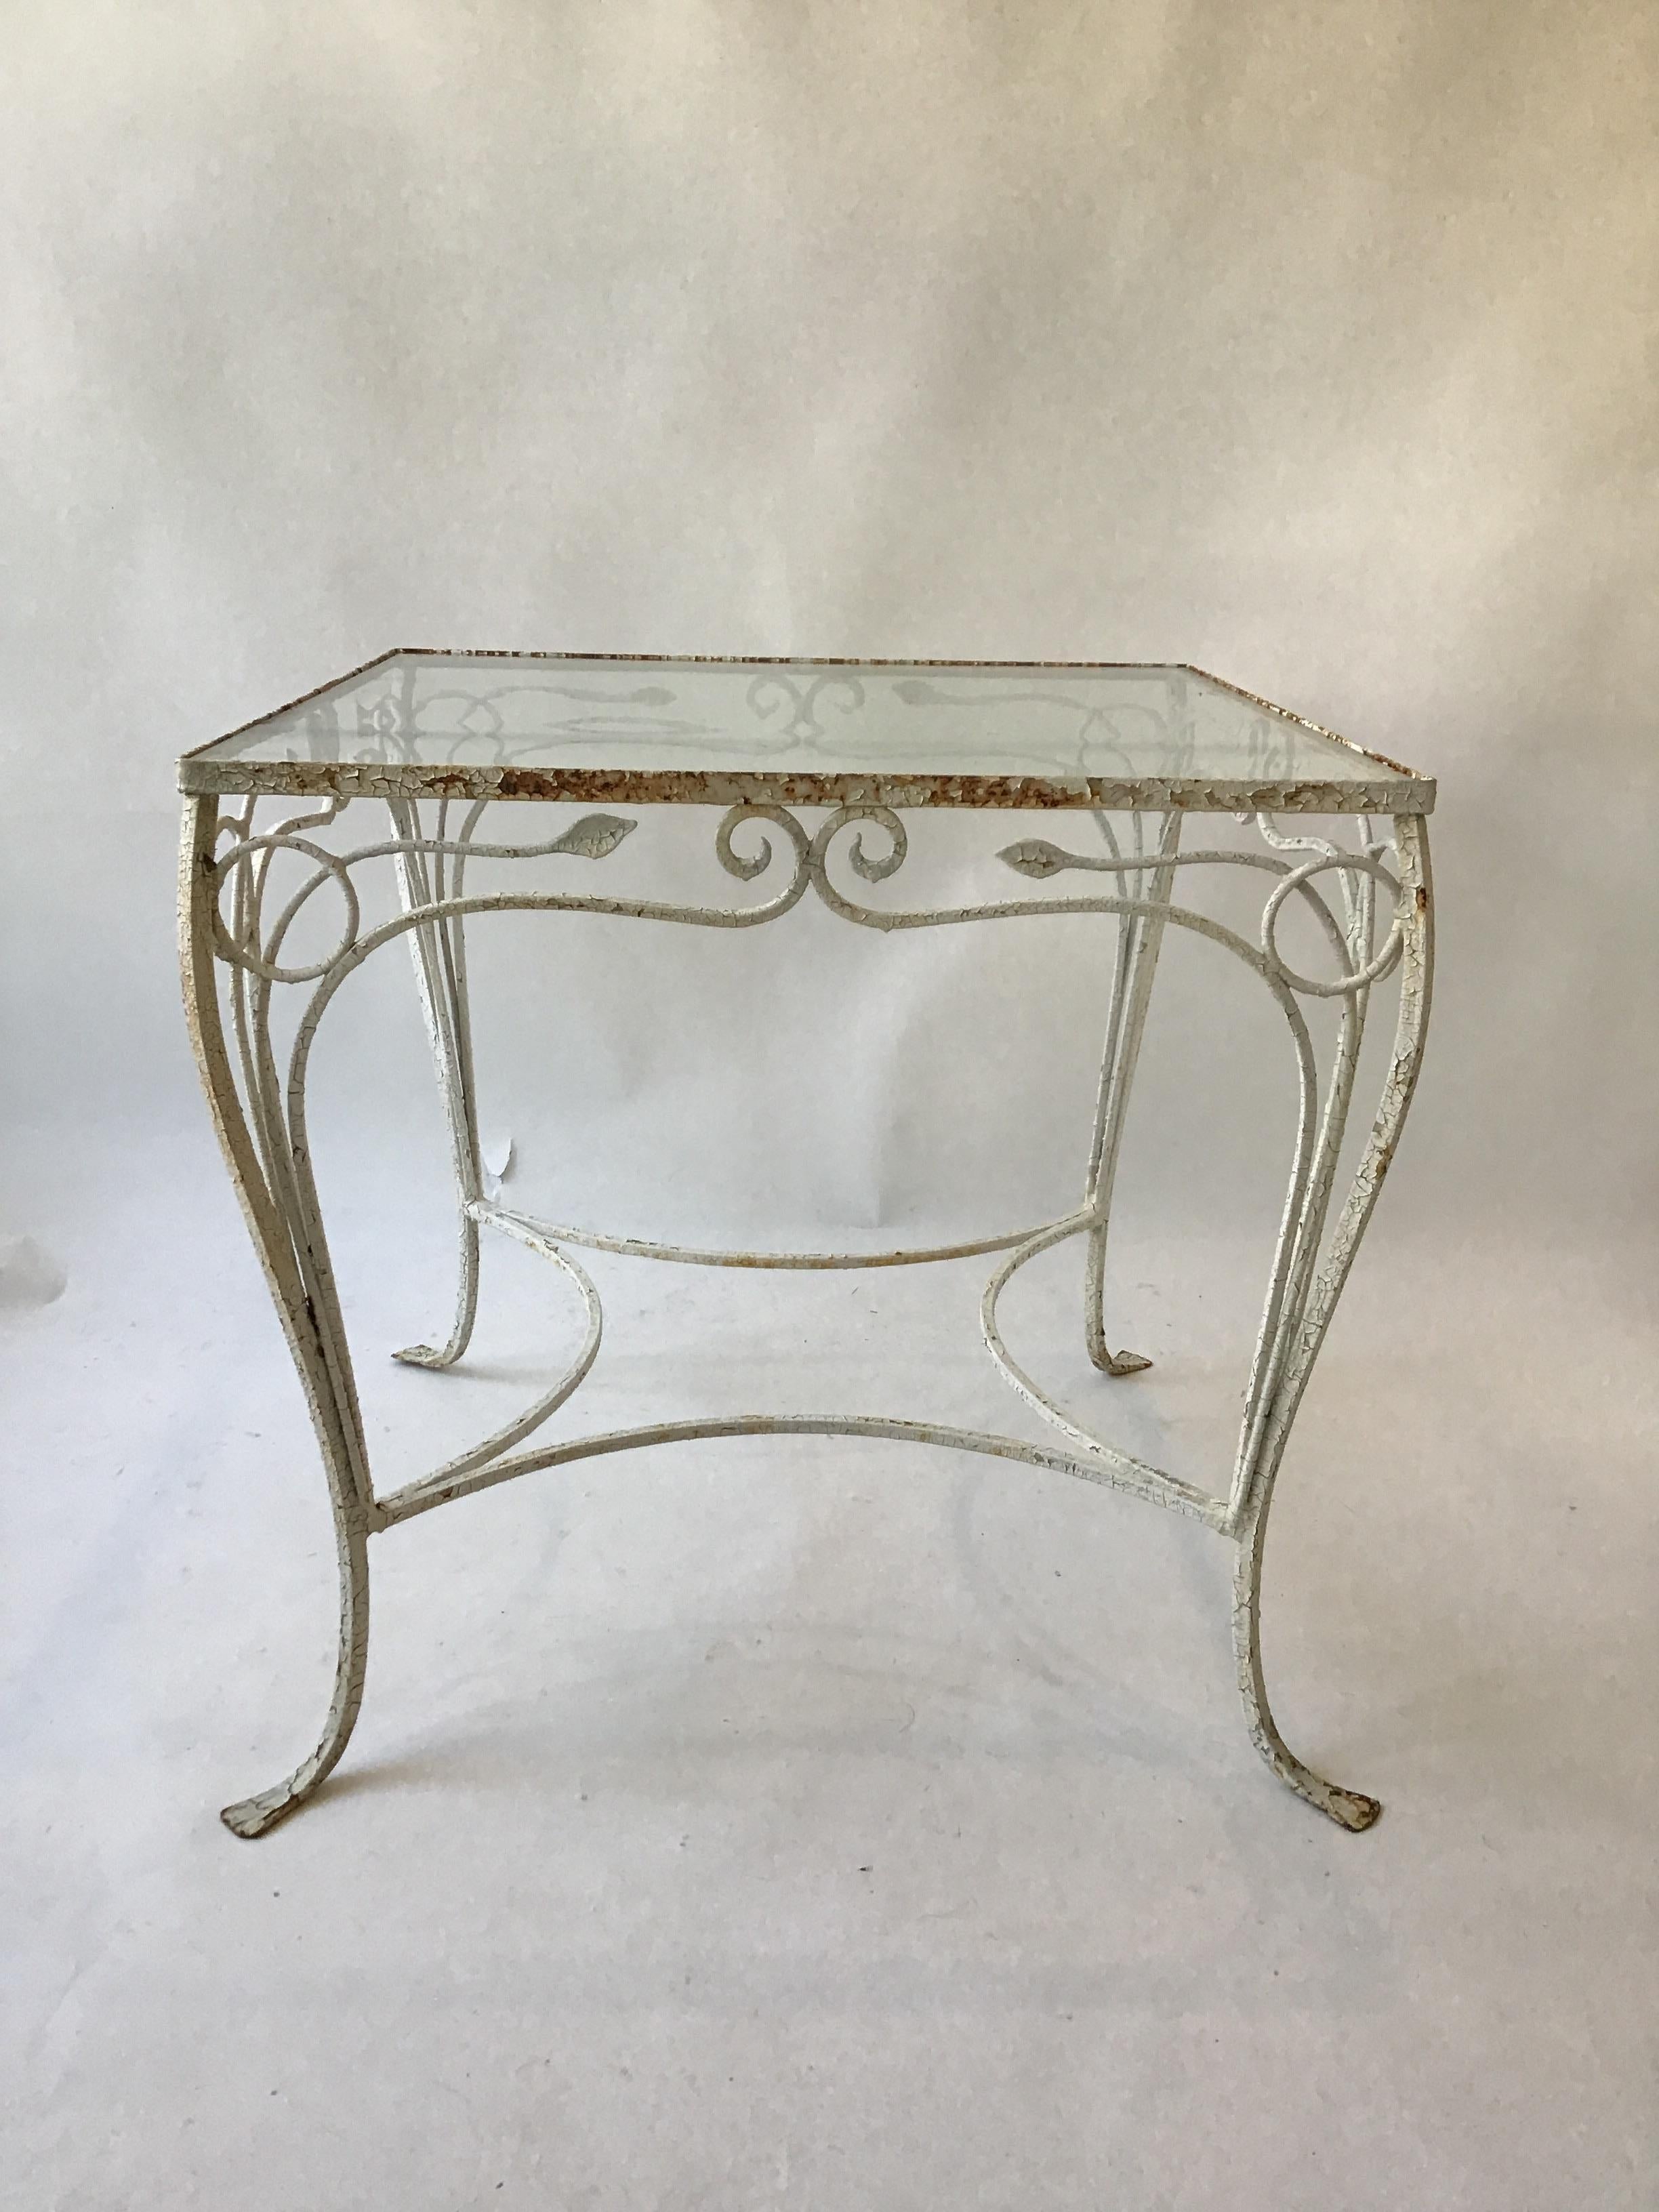 1950s Salterini Wrought Iron Small Outdoor Table In Fair Condition For Sale In Tarrytown, NY